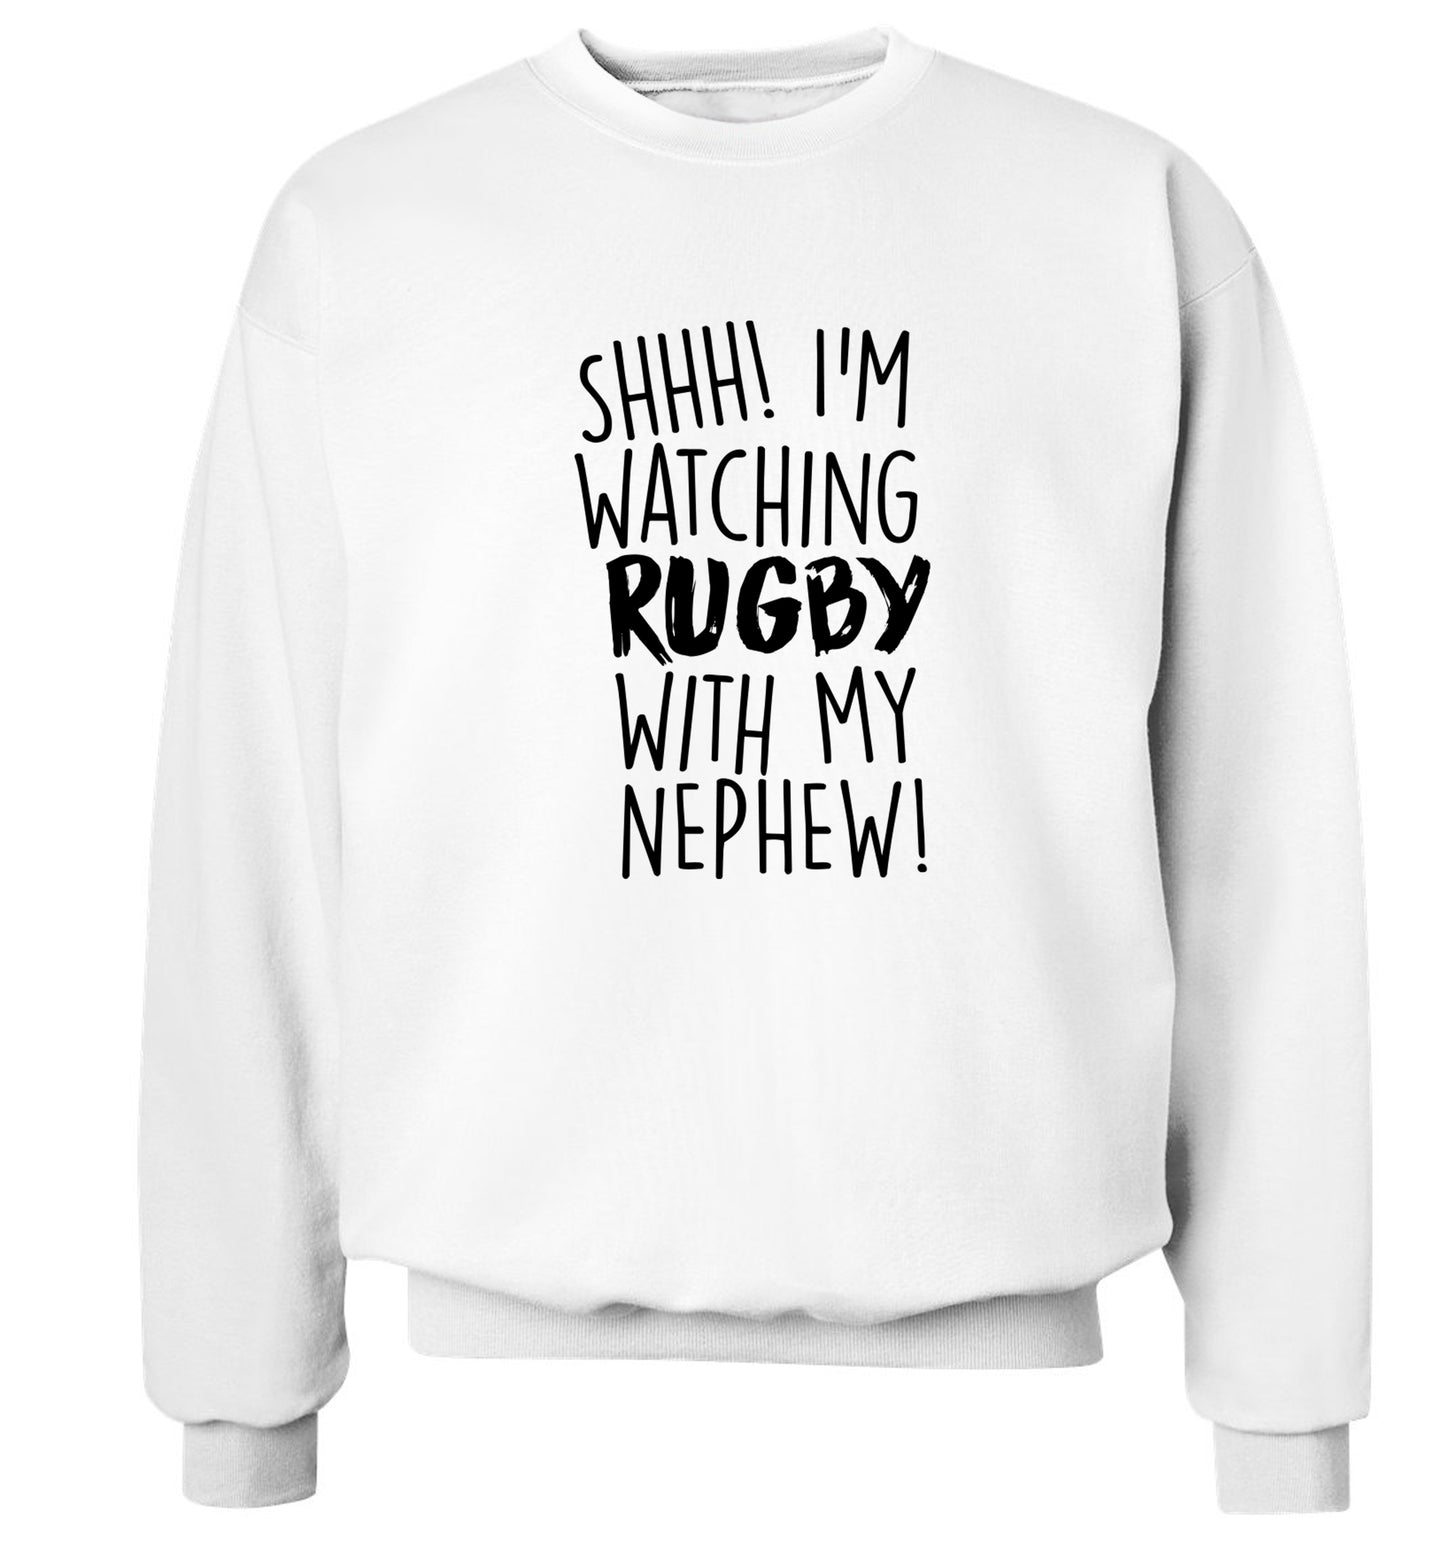 Shh.. I'm watching rugby with my nephew Adult's unisex white Sweater 2XL